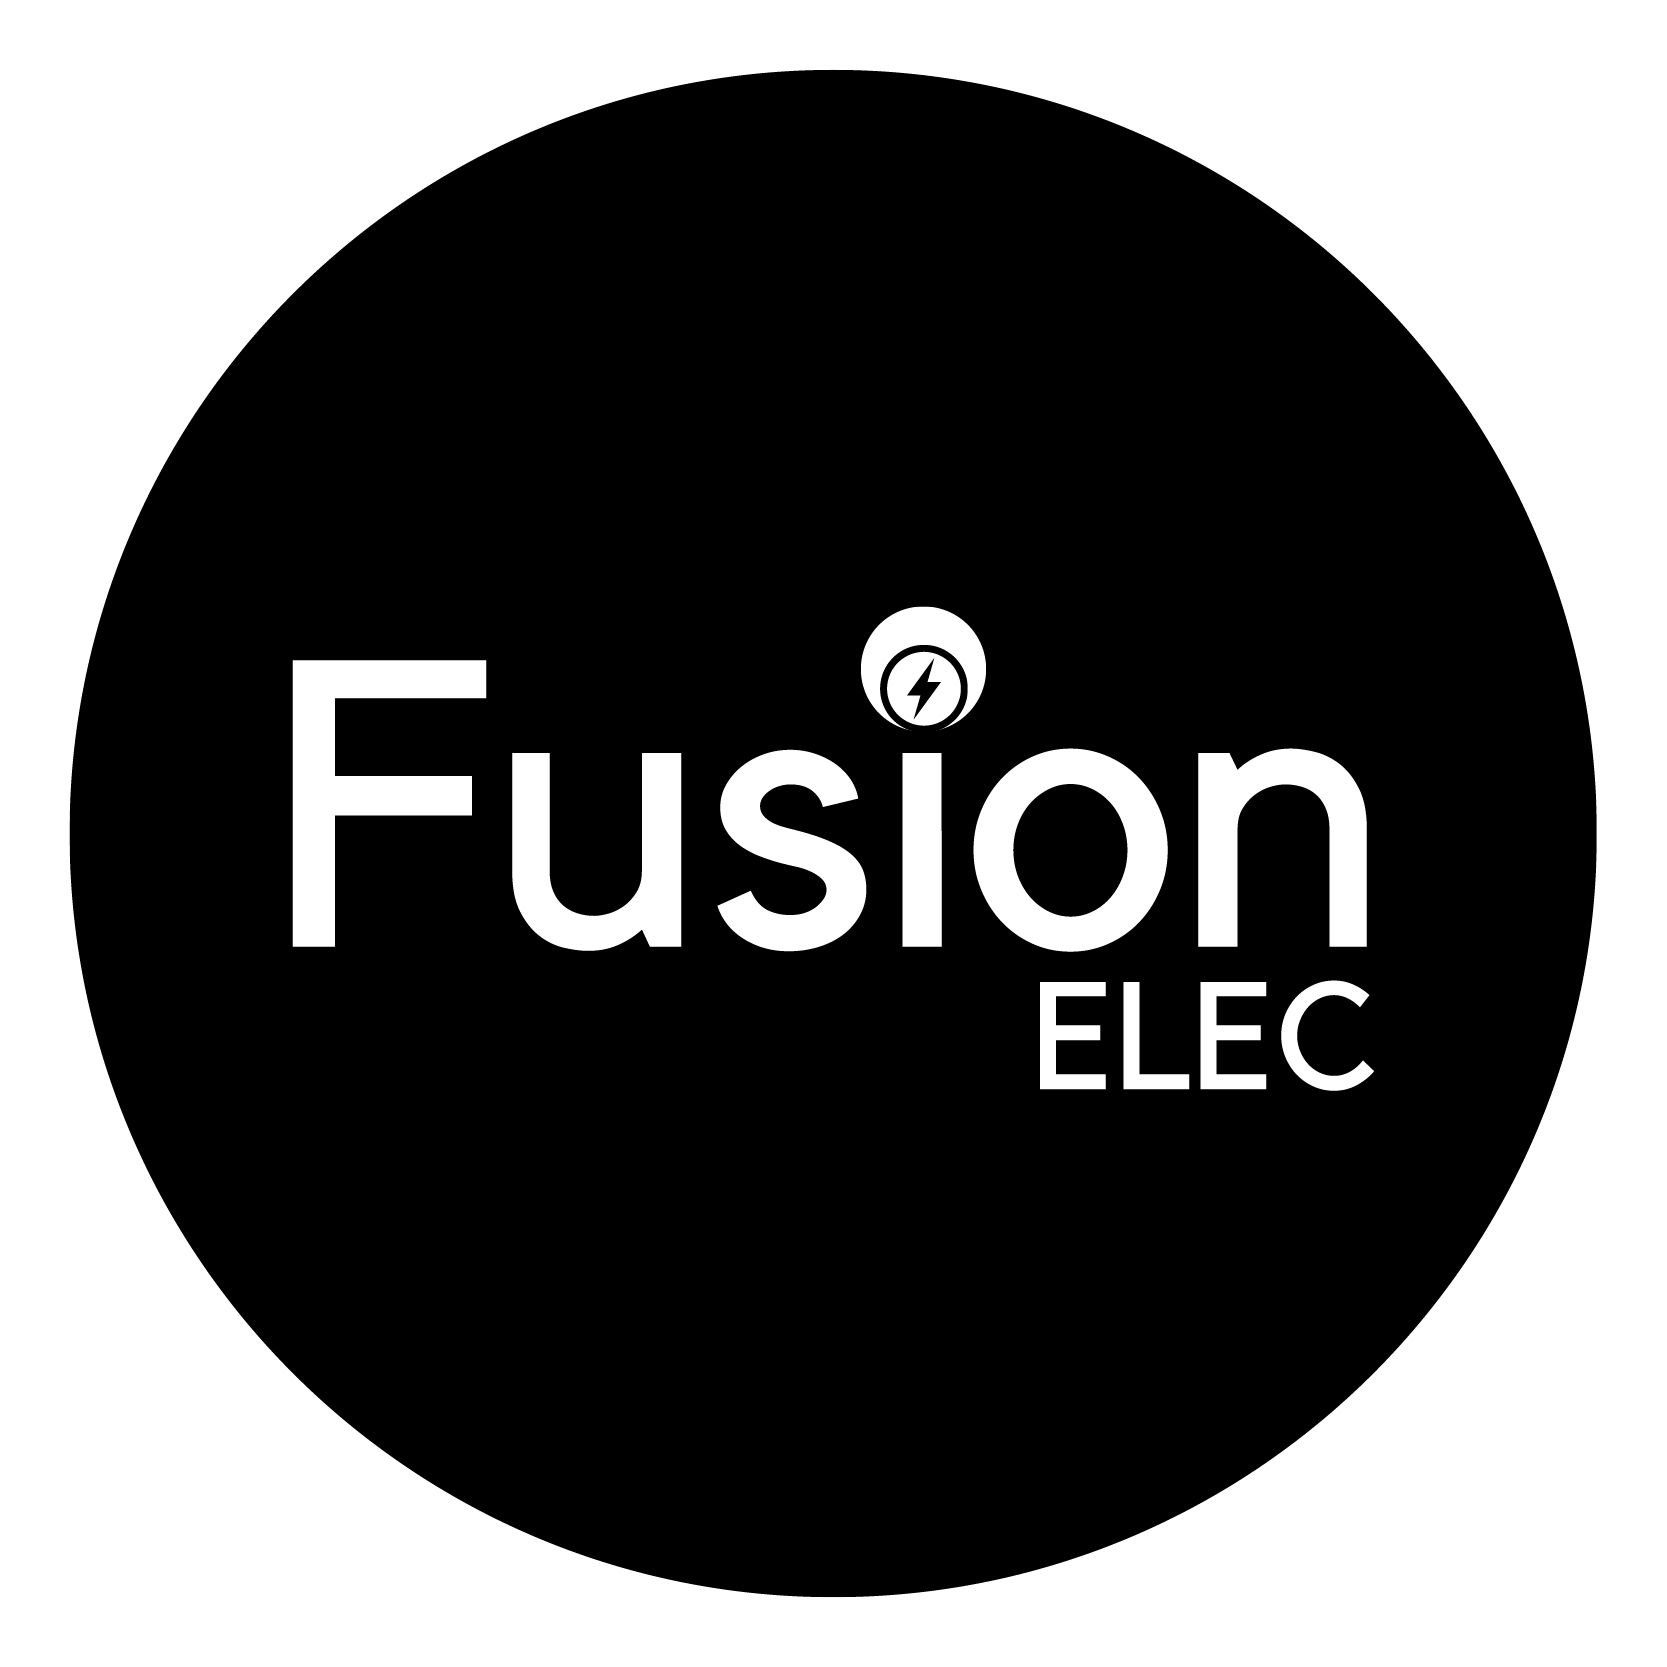 We're sponsored by Fusion Elec